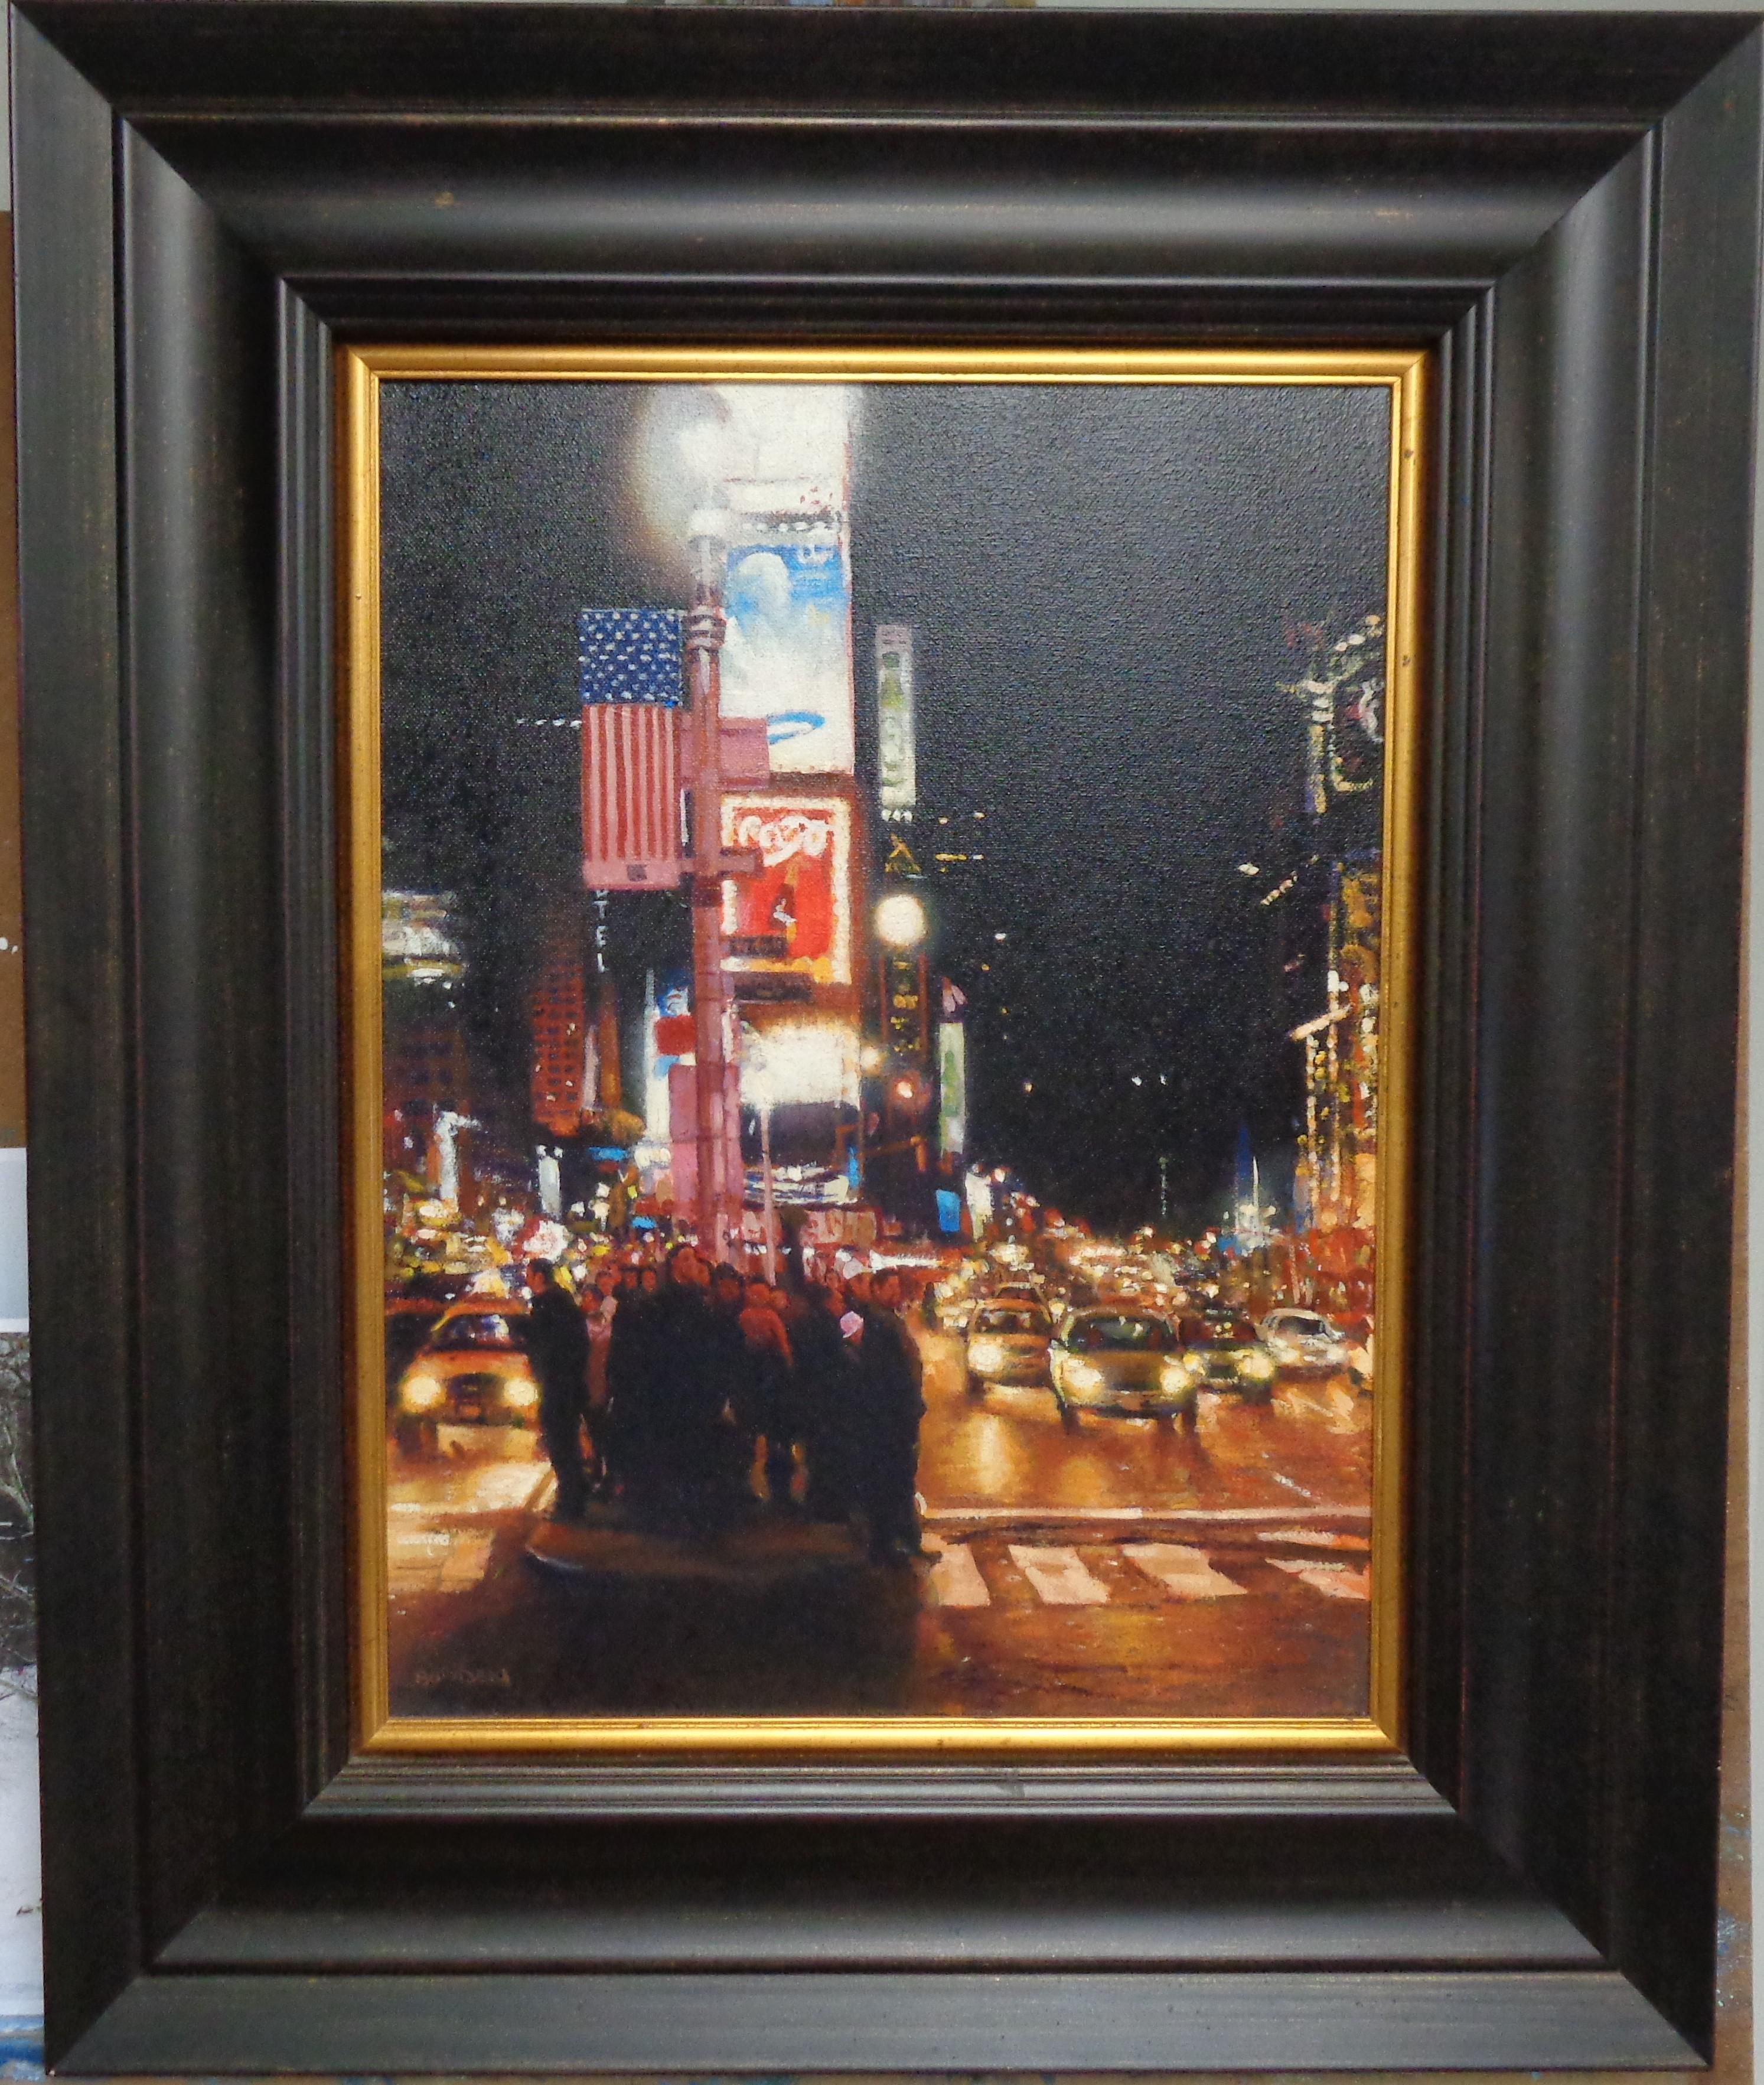 Times Square is an oil painting on canvas by award winning contemporary artist Michael Budden. It is a busy street nocturne in Times Square, NYC that I painted in 2008 and just repurchased when finding it in an auction.  The image measures 16 x 12 